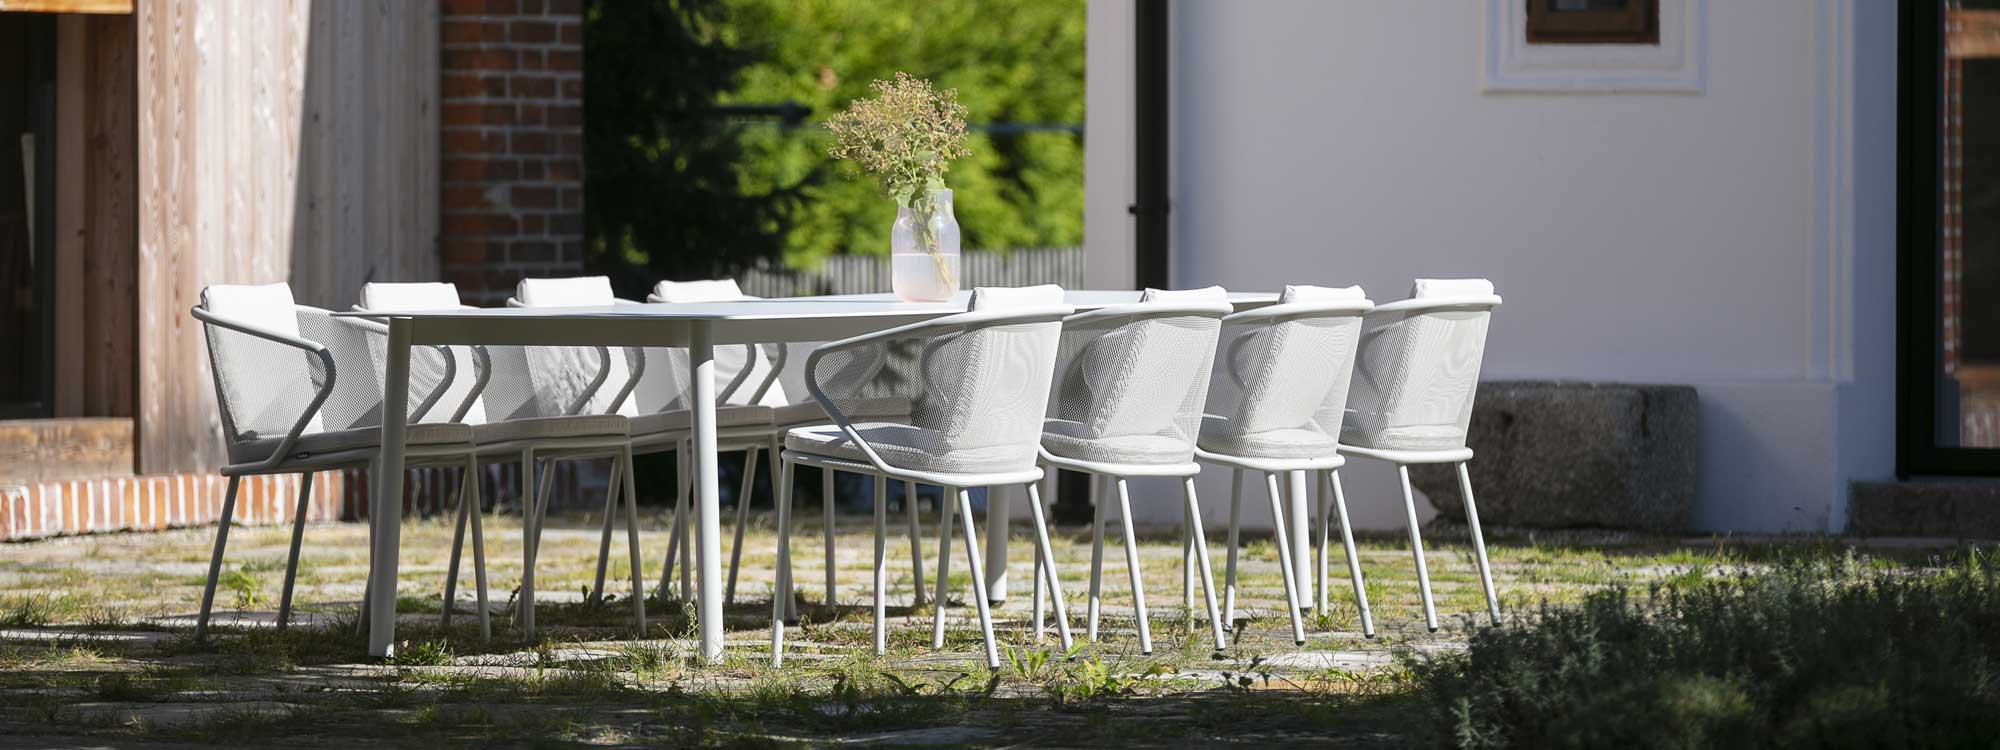 Condor modern outdoor dining set has curvaceous design by Studio Segers for Todus stainless steel furniture